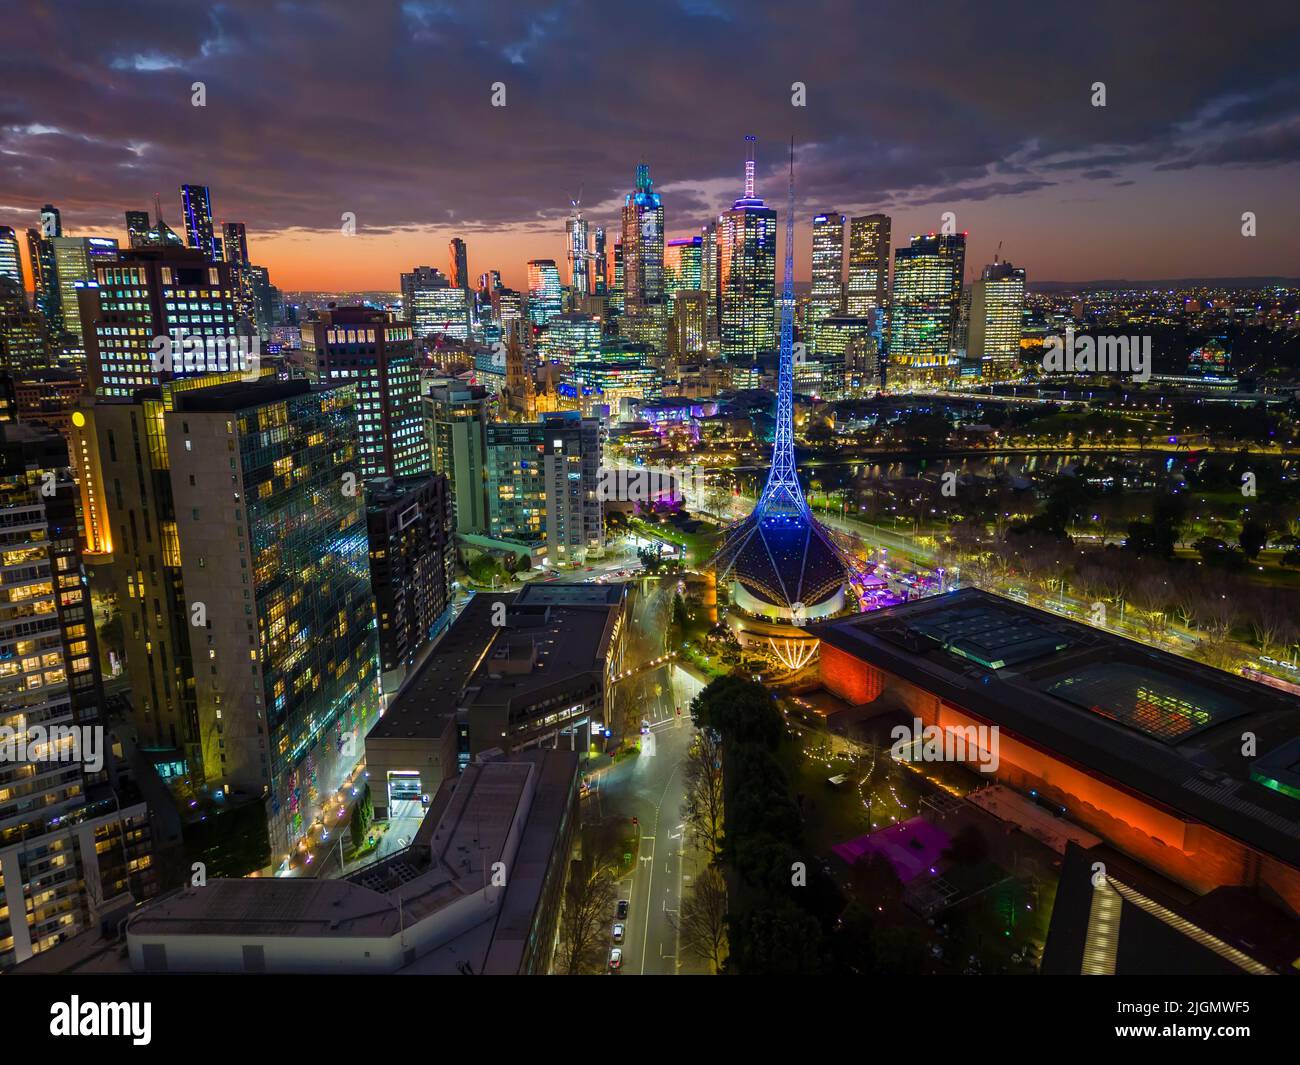 Aerial view of Melbourne city at night Stock Photo